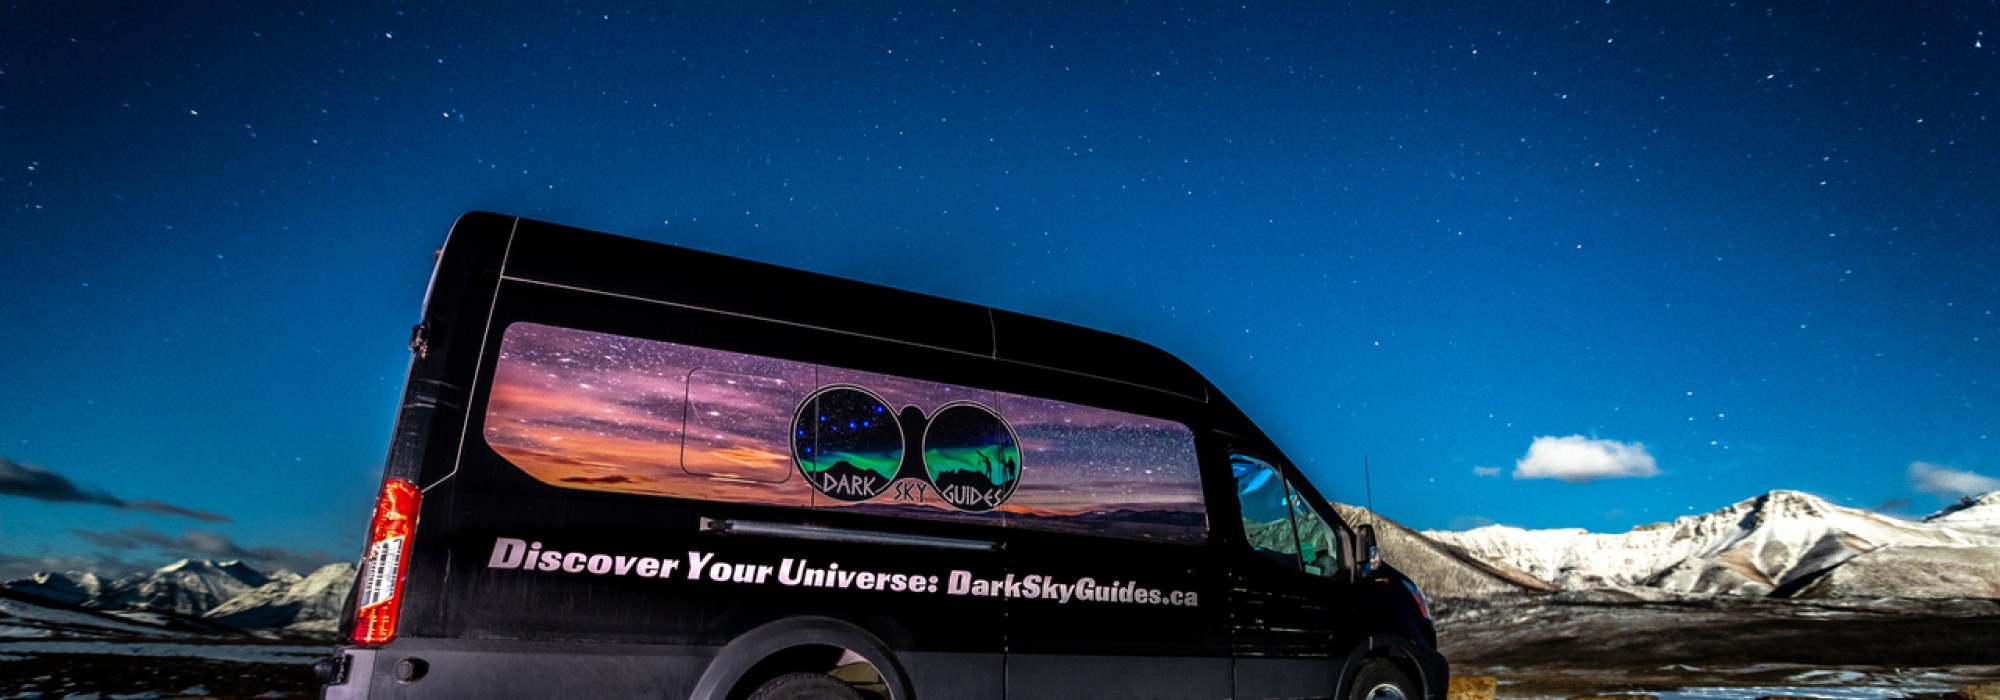 Discover Your Universe with the Dark Sky Guides - Photo courtesy Travel Alberta / John Price